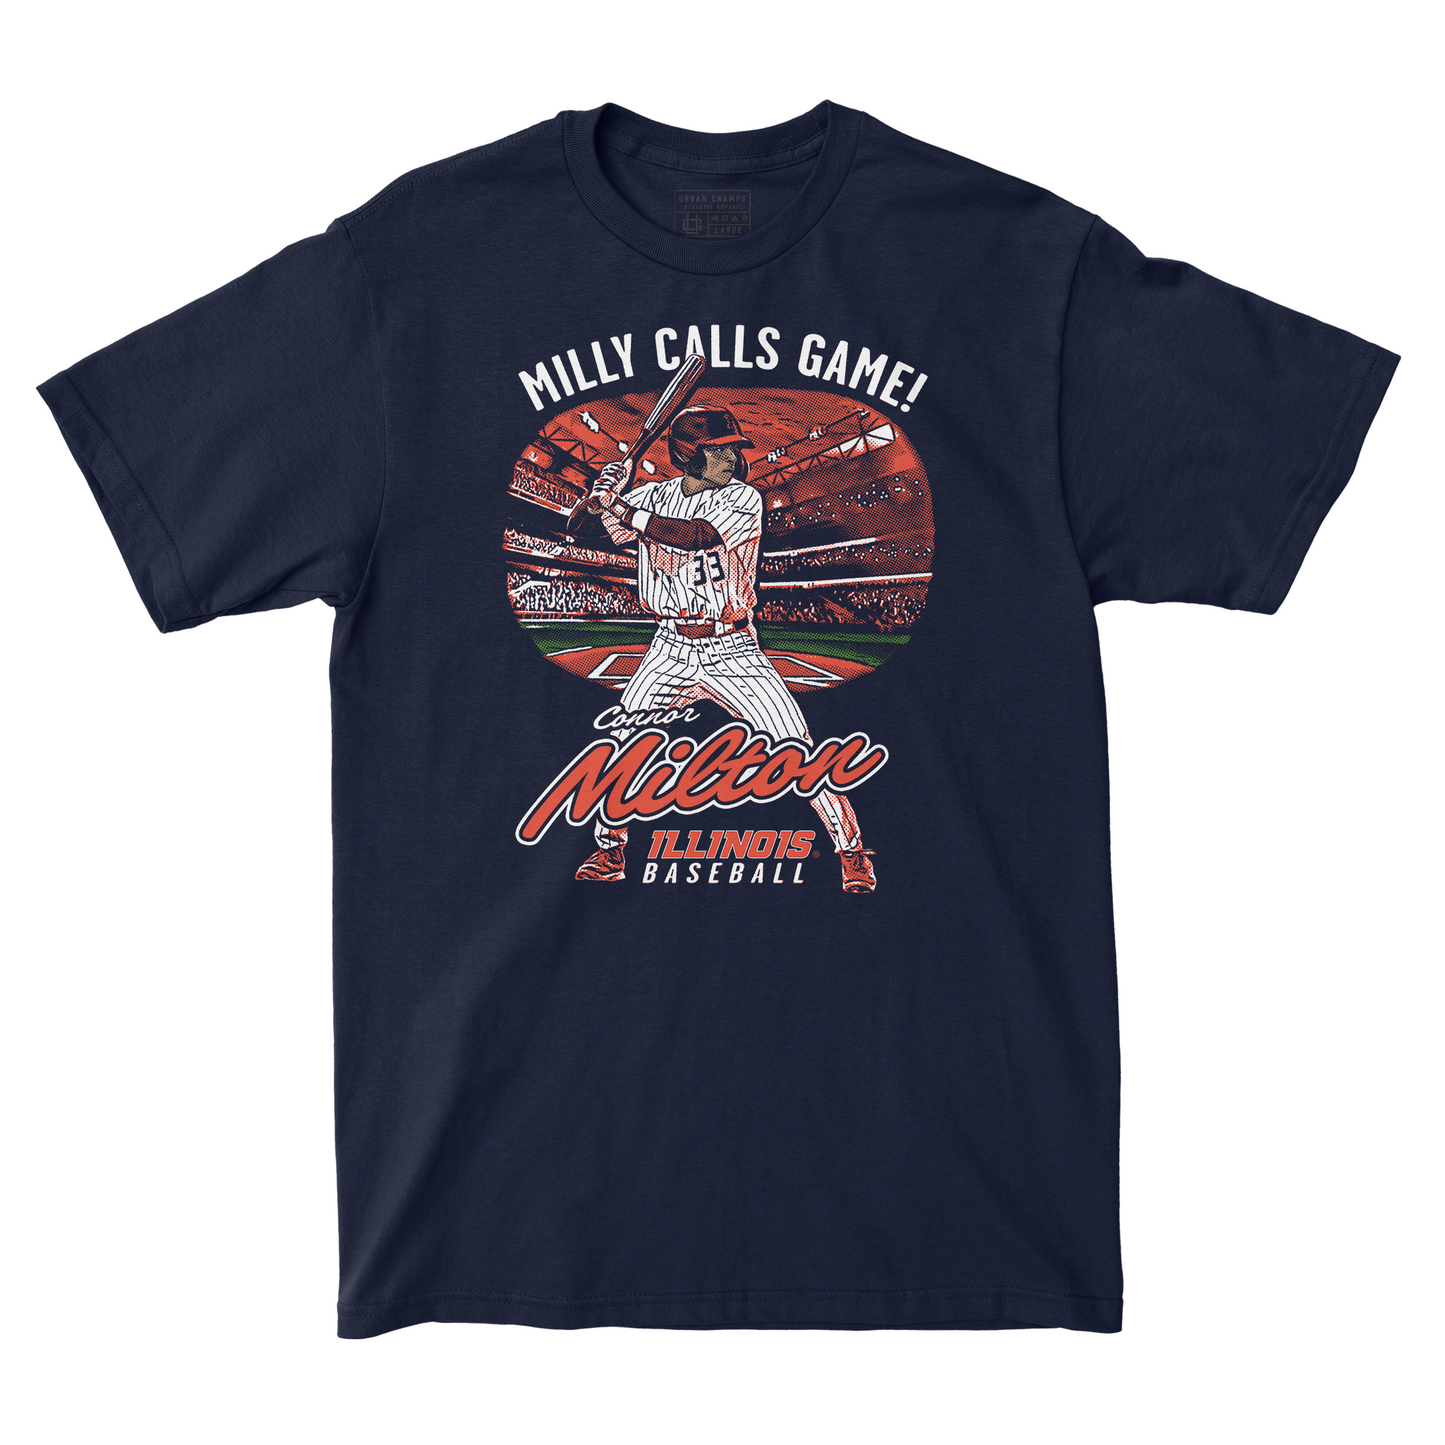 EXCLUSIVE RELEASE: Connor Milton 'Milly Calls Game' Tee